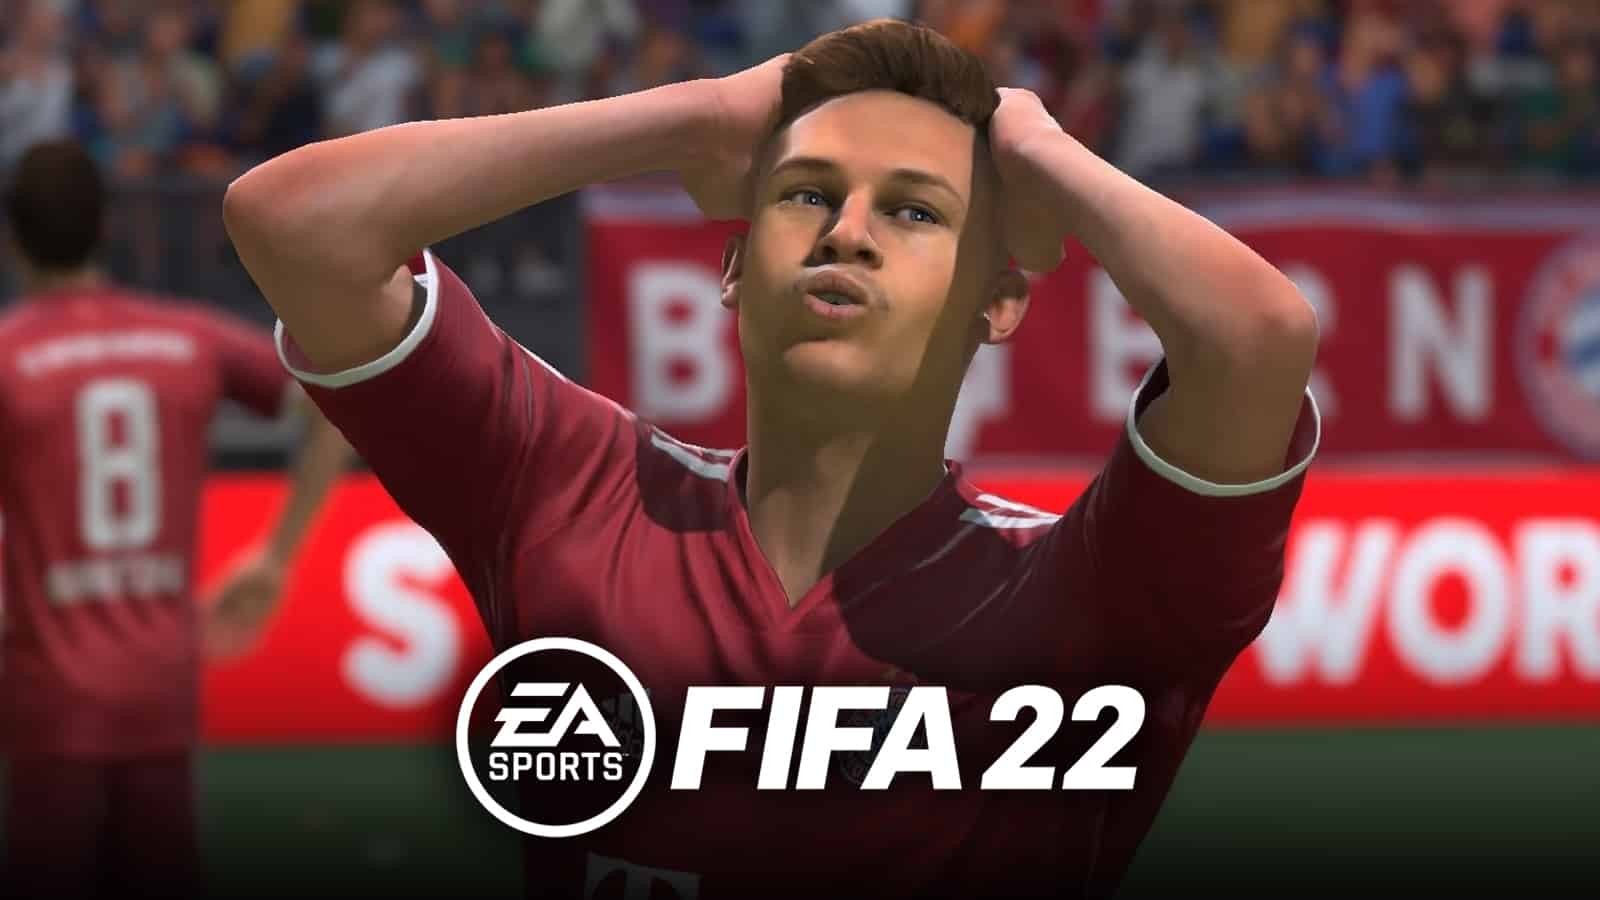 Joshua Kimmich with hands in air in FIFA 22